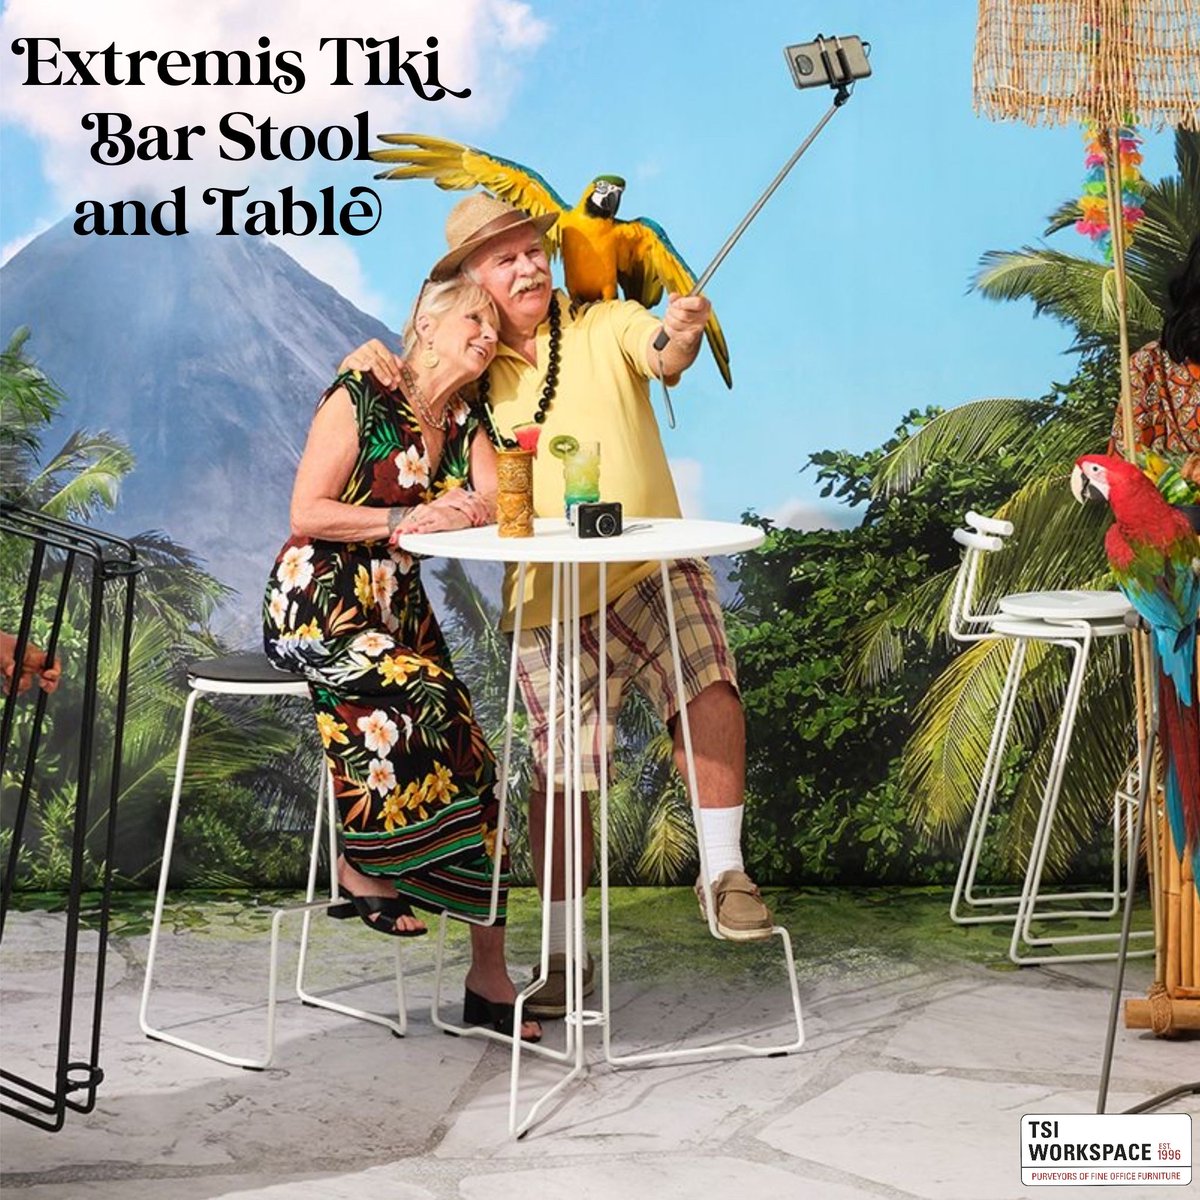 Extremis Tiki Bar Stool and Table

This alluring table and stool await you, along with a fine, refreshing cocktail. Tiki is aperitif 2.0: a modern twist on the high-top café setting

bit.ly/3o1iPIa

#furniture #commercialfurniture #designerfurniture